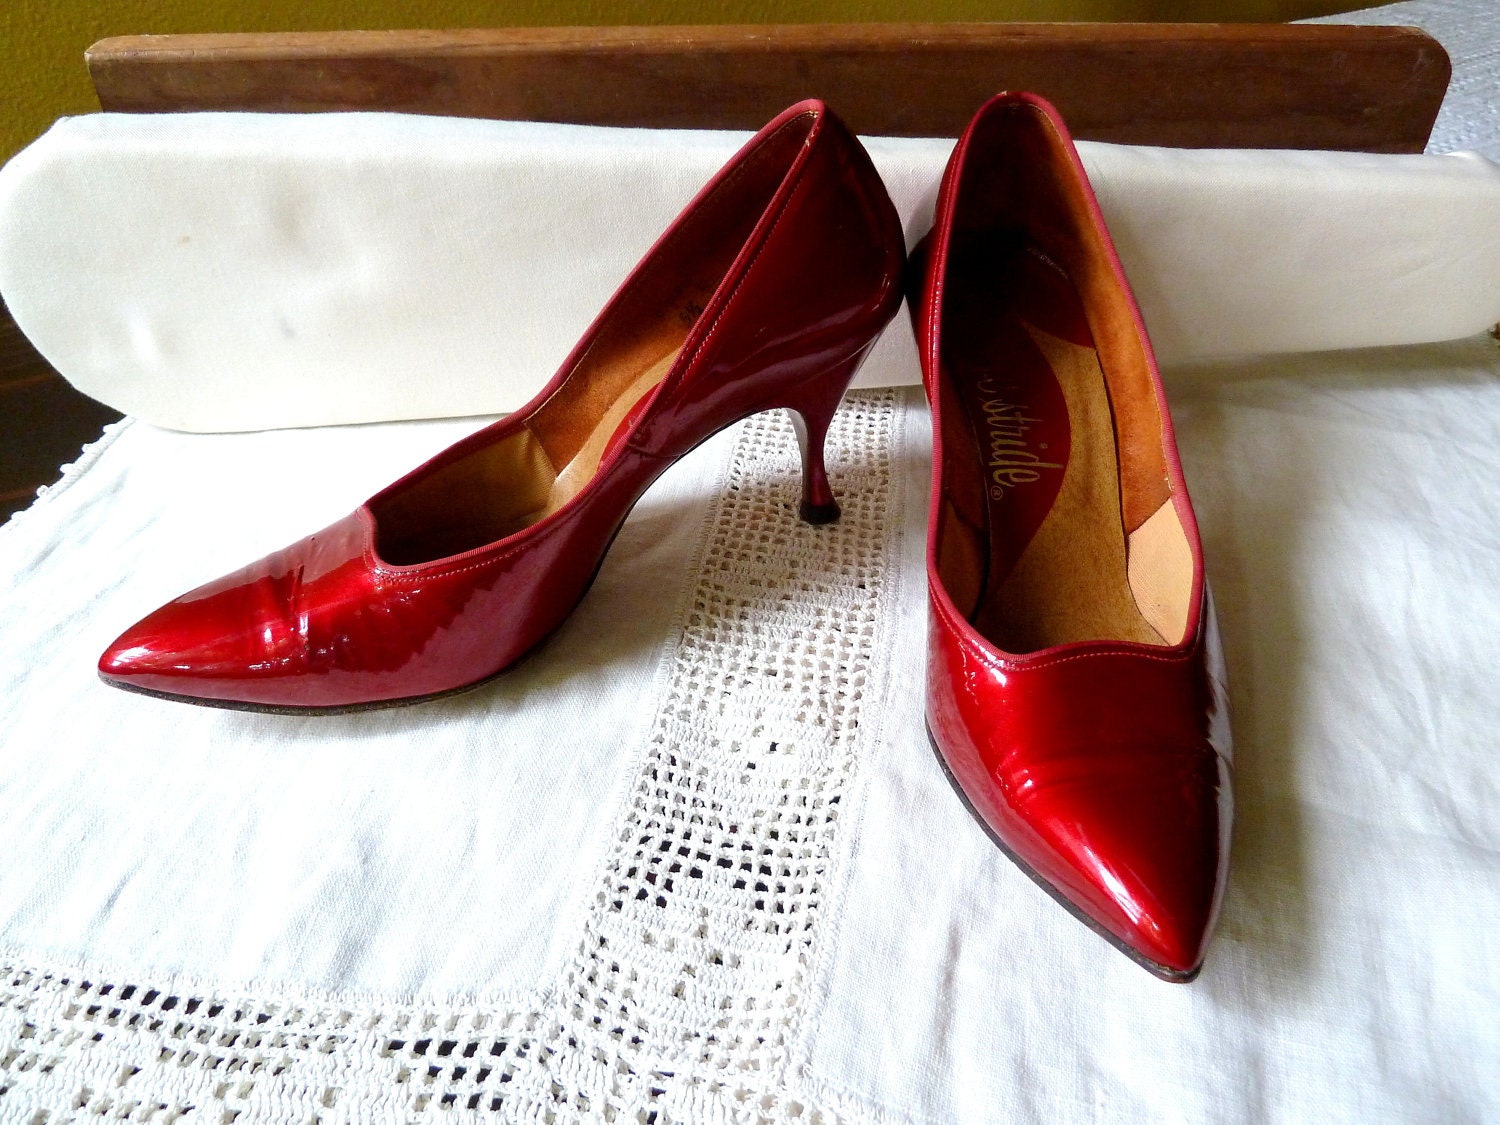 Vintage 1950's Candie Apple Patent Leather Red Pump Shoe, Retro Fashions